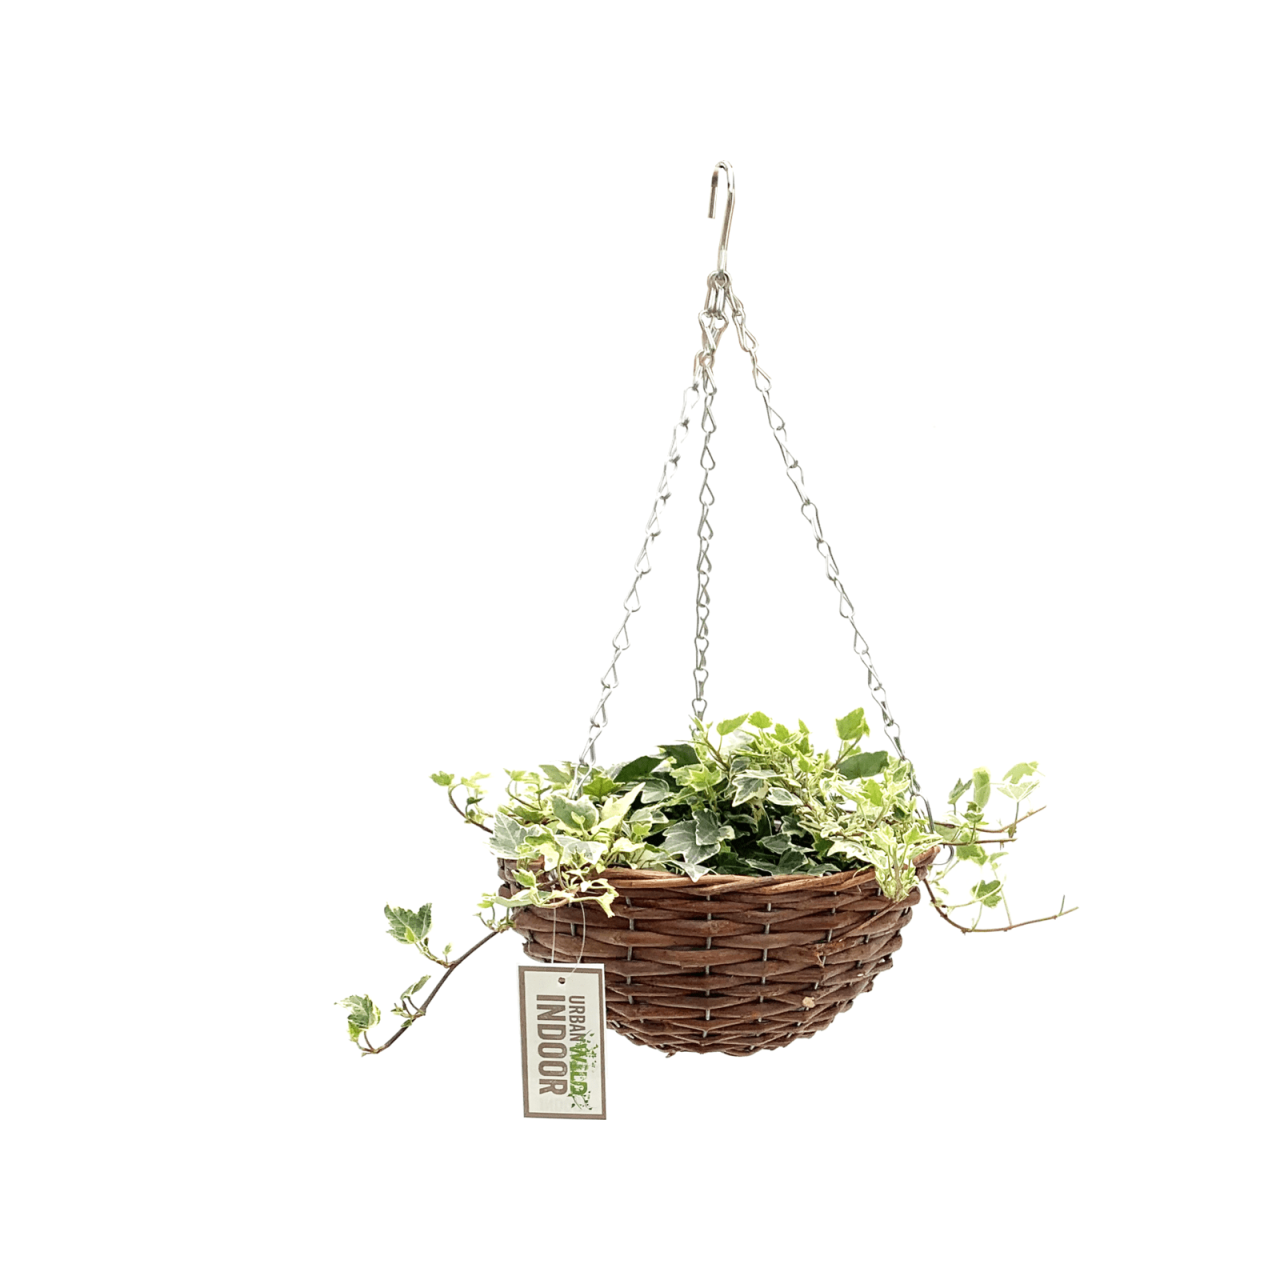 Hanging Plants Indoor | Cane Hanging Baskets: A Versatile Addition to Your Home Decor from Bunnings